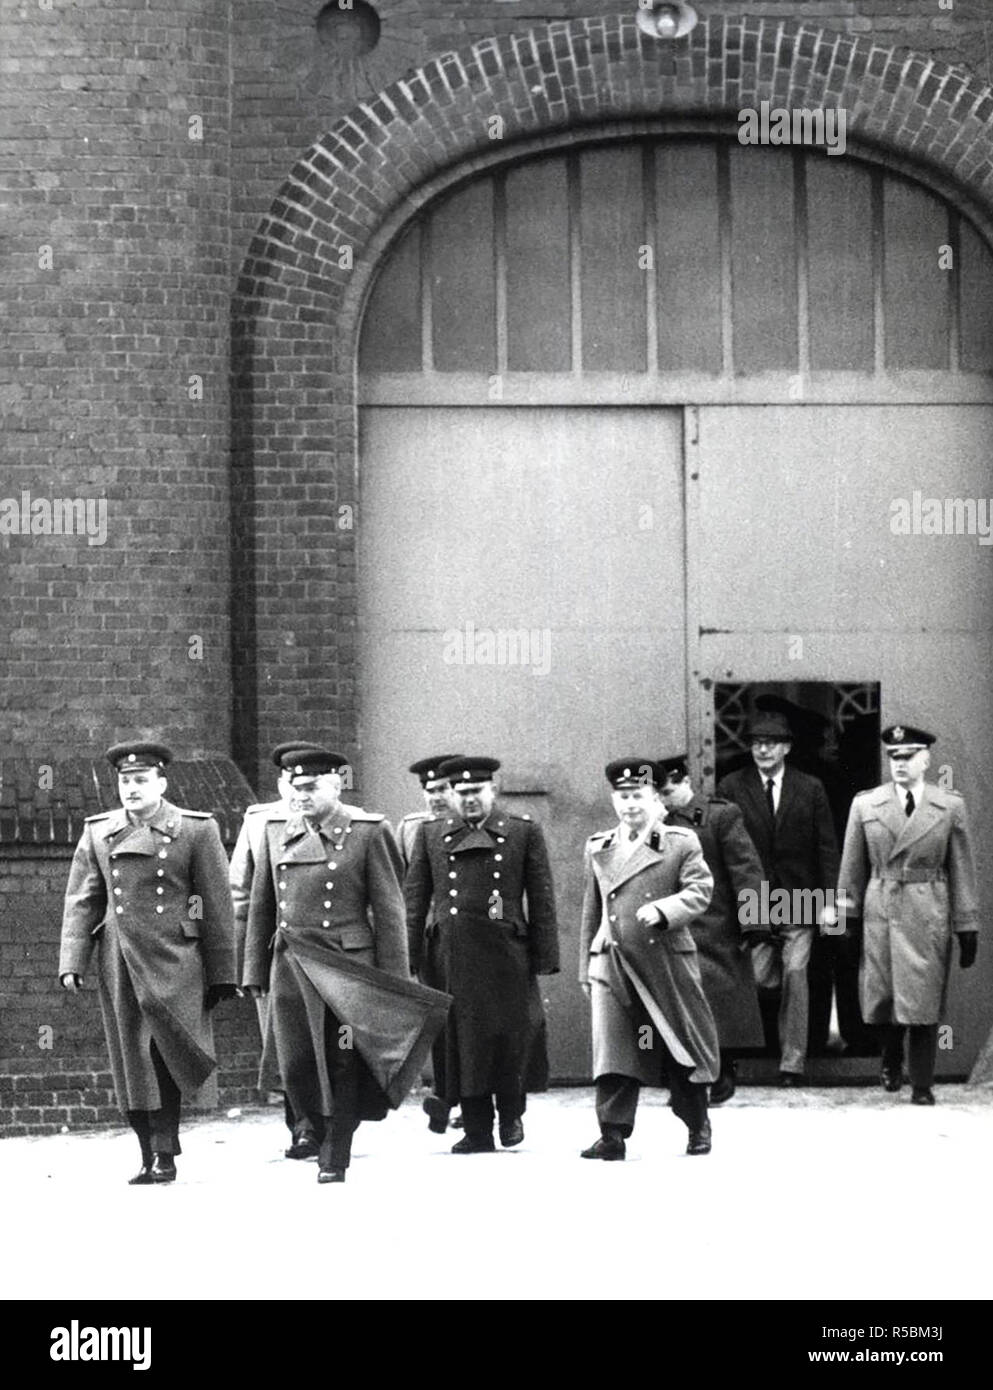 4/1/1962 -  The Senior Soviet Commander Lt. Col. Solowjew (Second From Left) Arrived at The Spandauer War Criminal Prison On April 1, 1962. On This Day Americans Are Relieving Soviet Guards of Their Duty at The Prison. Lt. Col Solojew Entered The Prison Over The British Sector Since He Was Denied Access By Americans to West Berlin On Their Border. Stock Photo